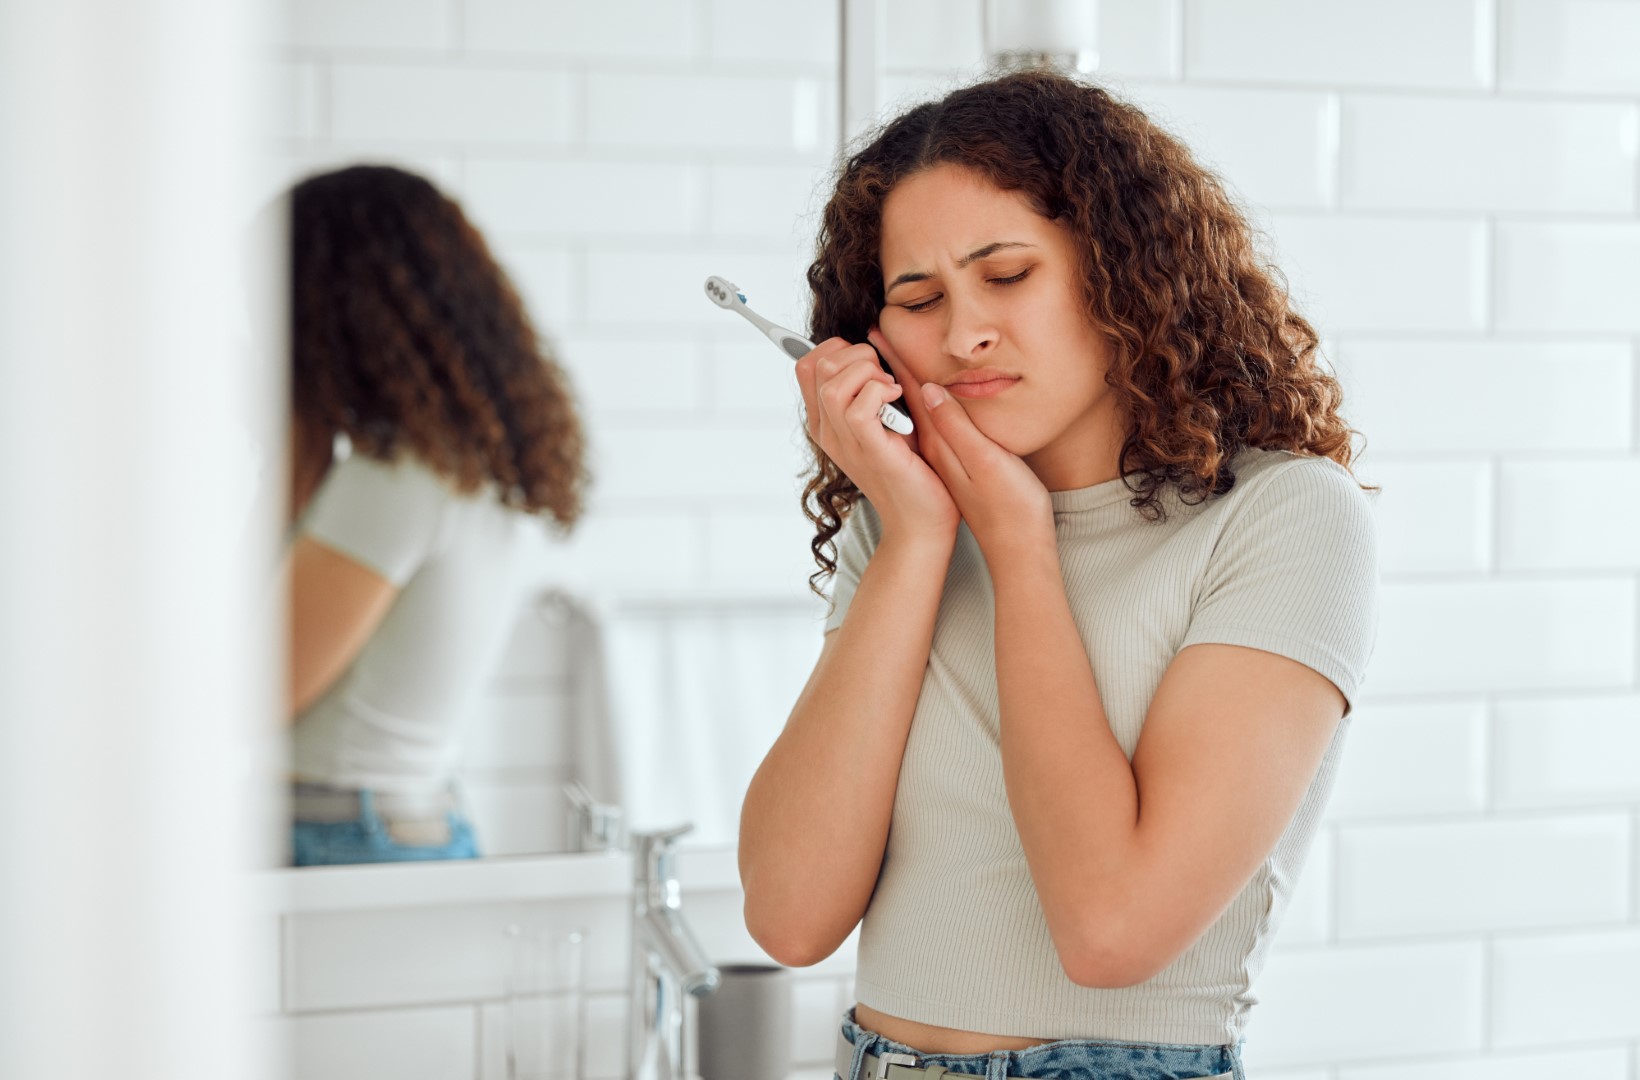 Woman holding toothbrush stops brushing her teeth and presses left hand to cheek.